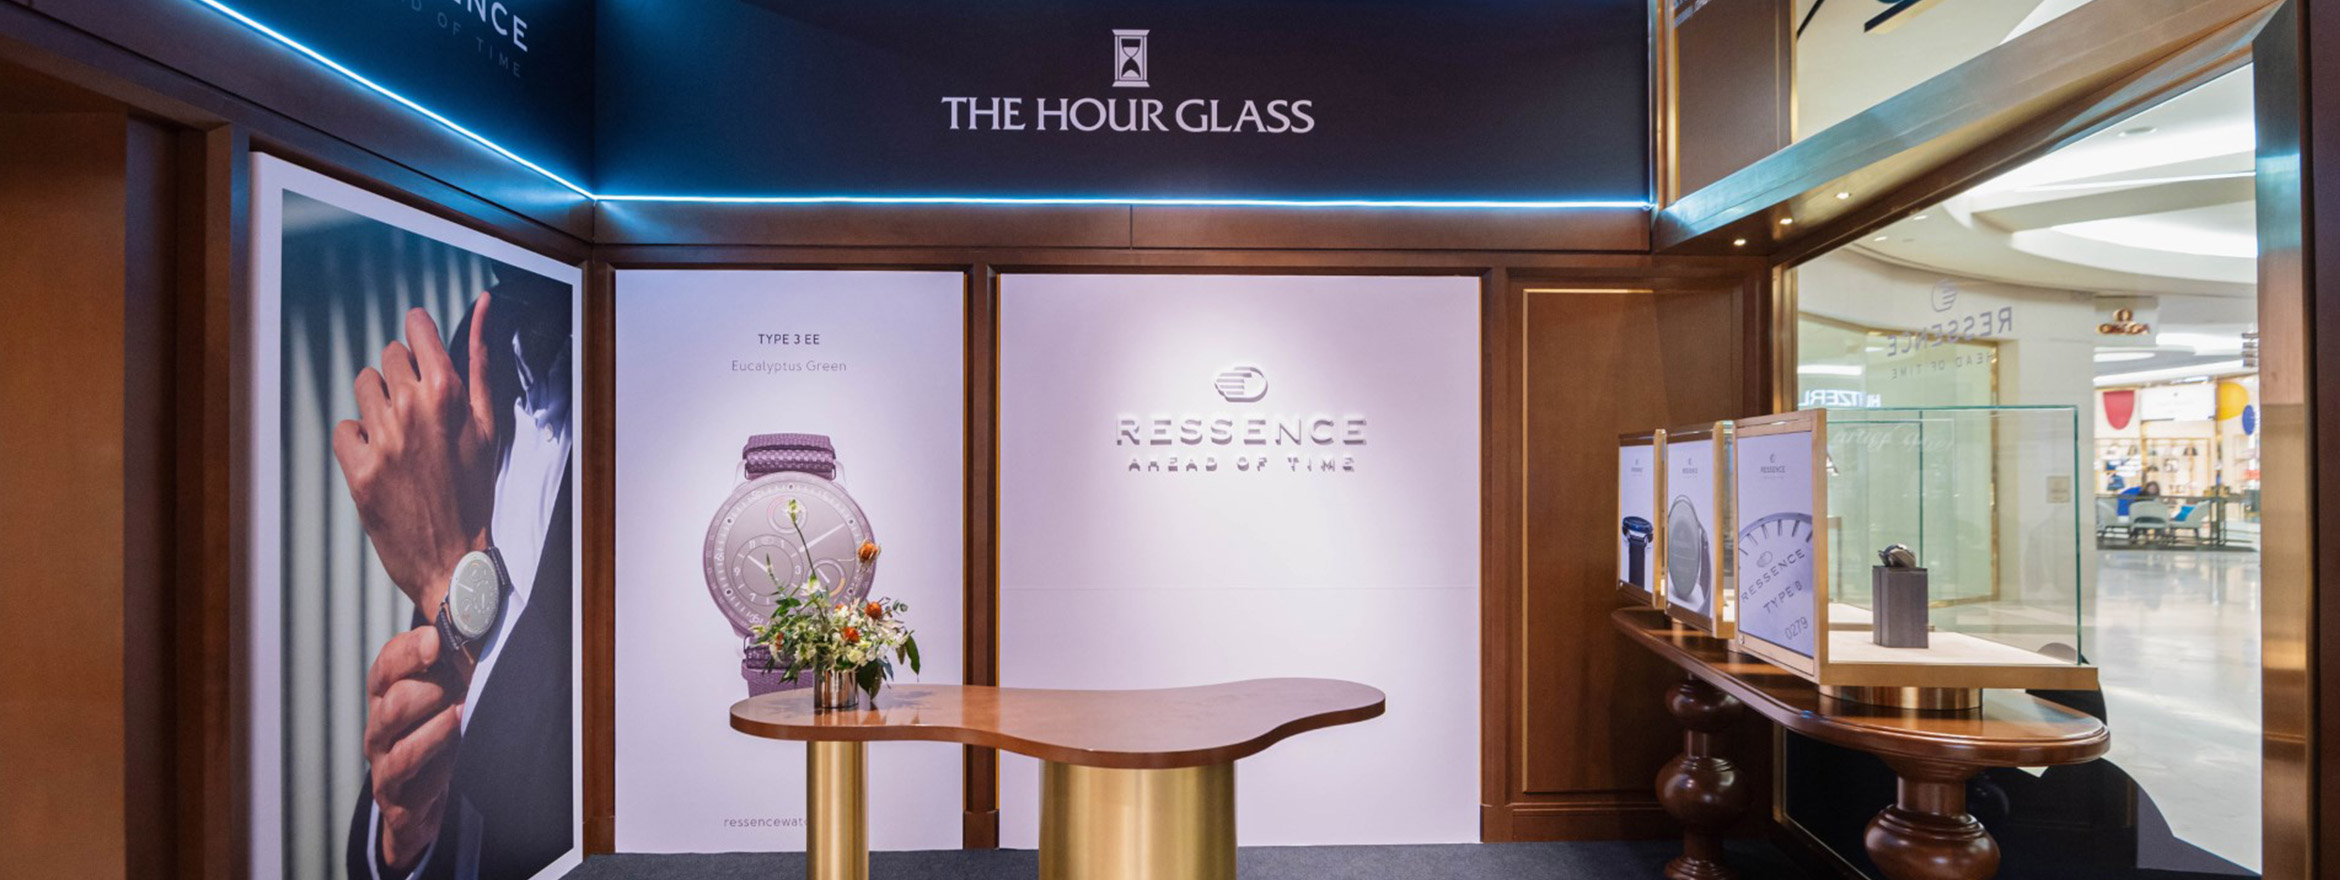 The Hour Glass Welcomes Ressence to Malaysia